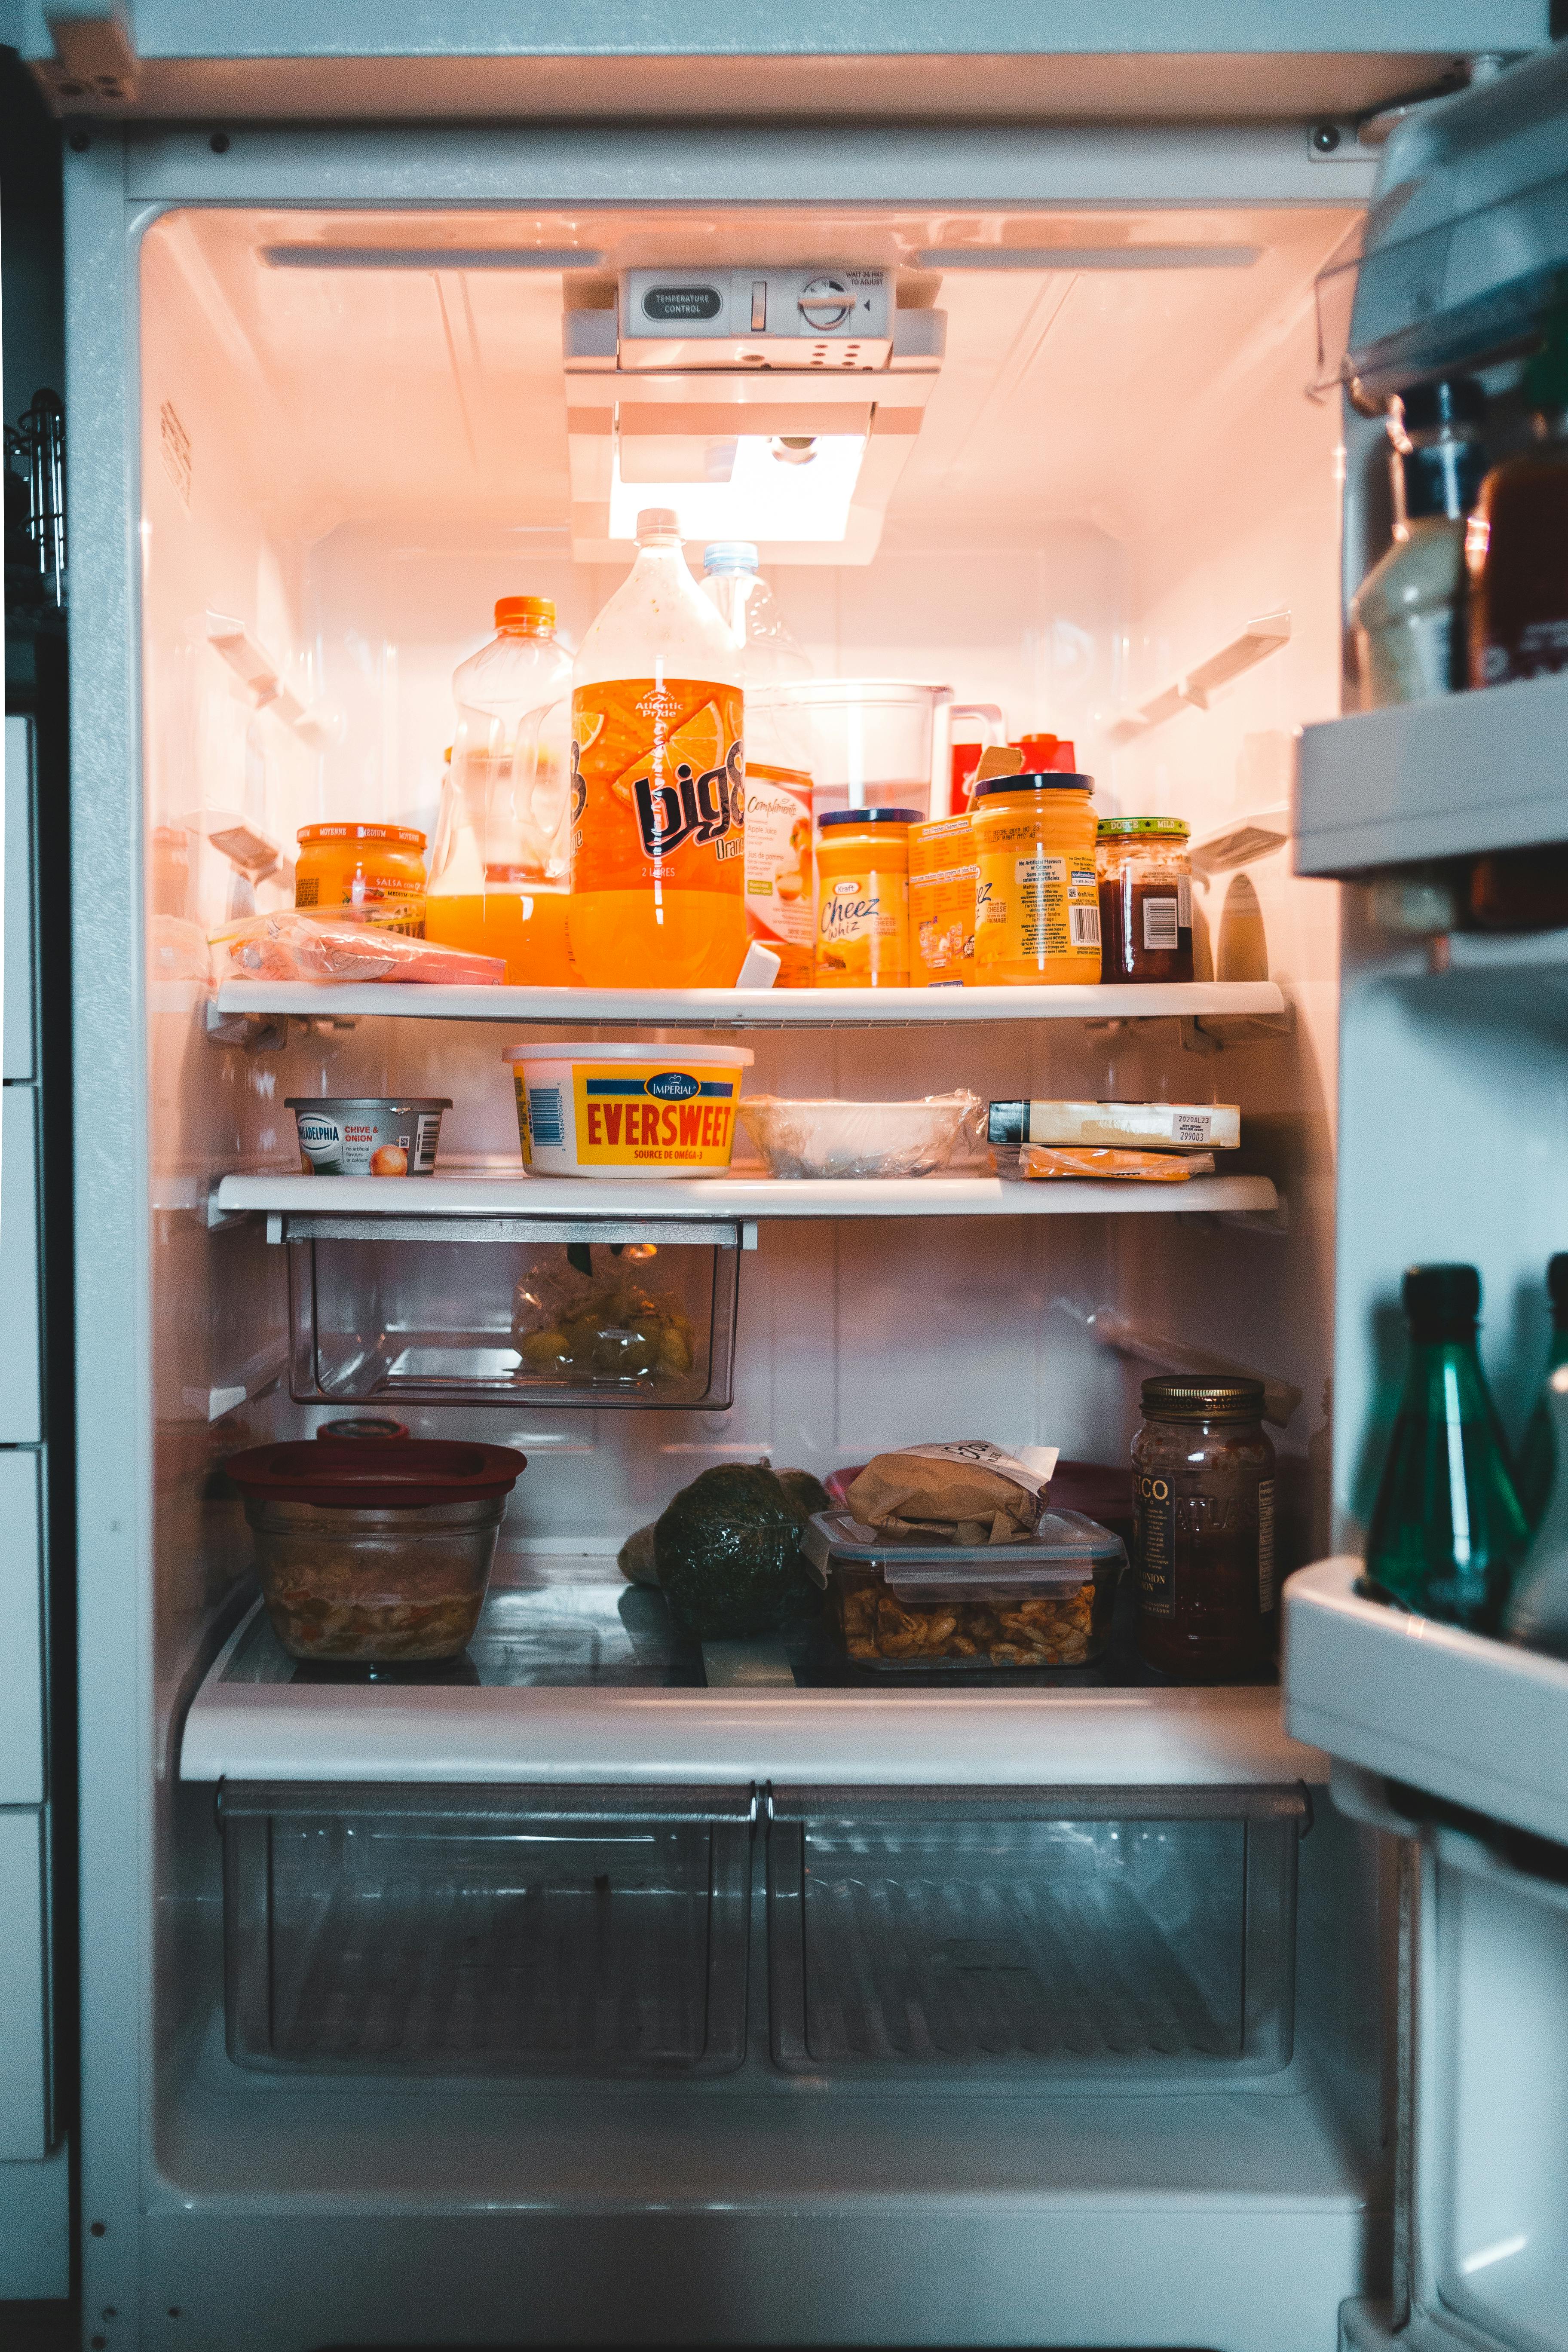 Opened fridge with drinks and food |  Source: Pexels